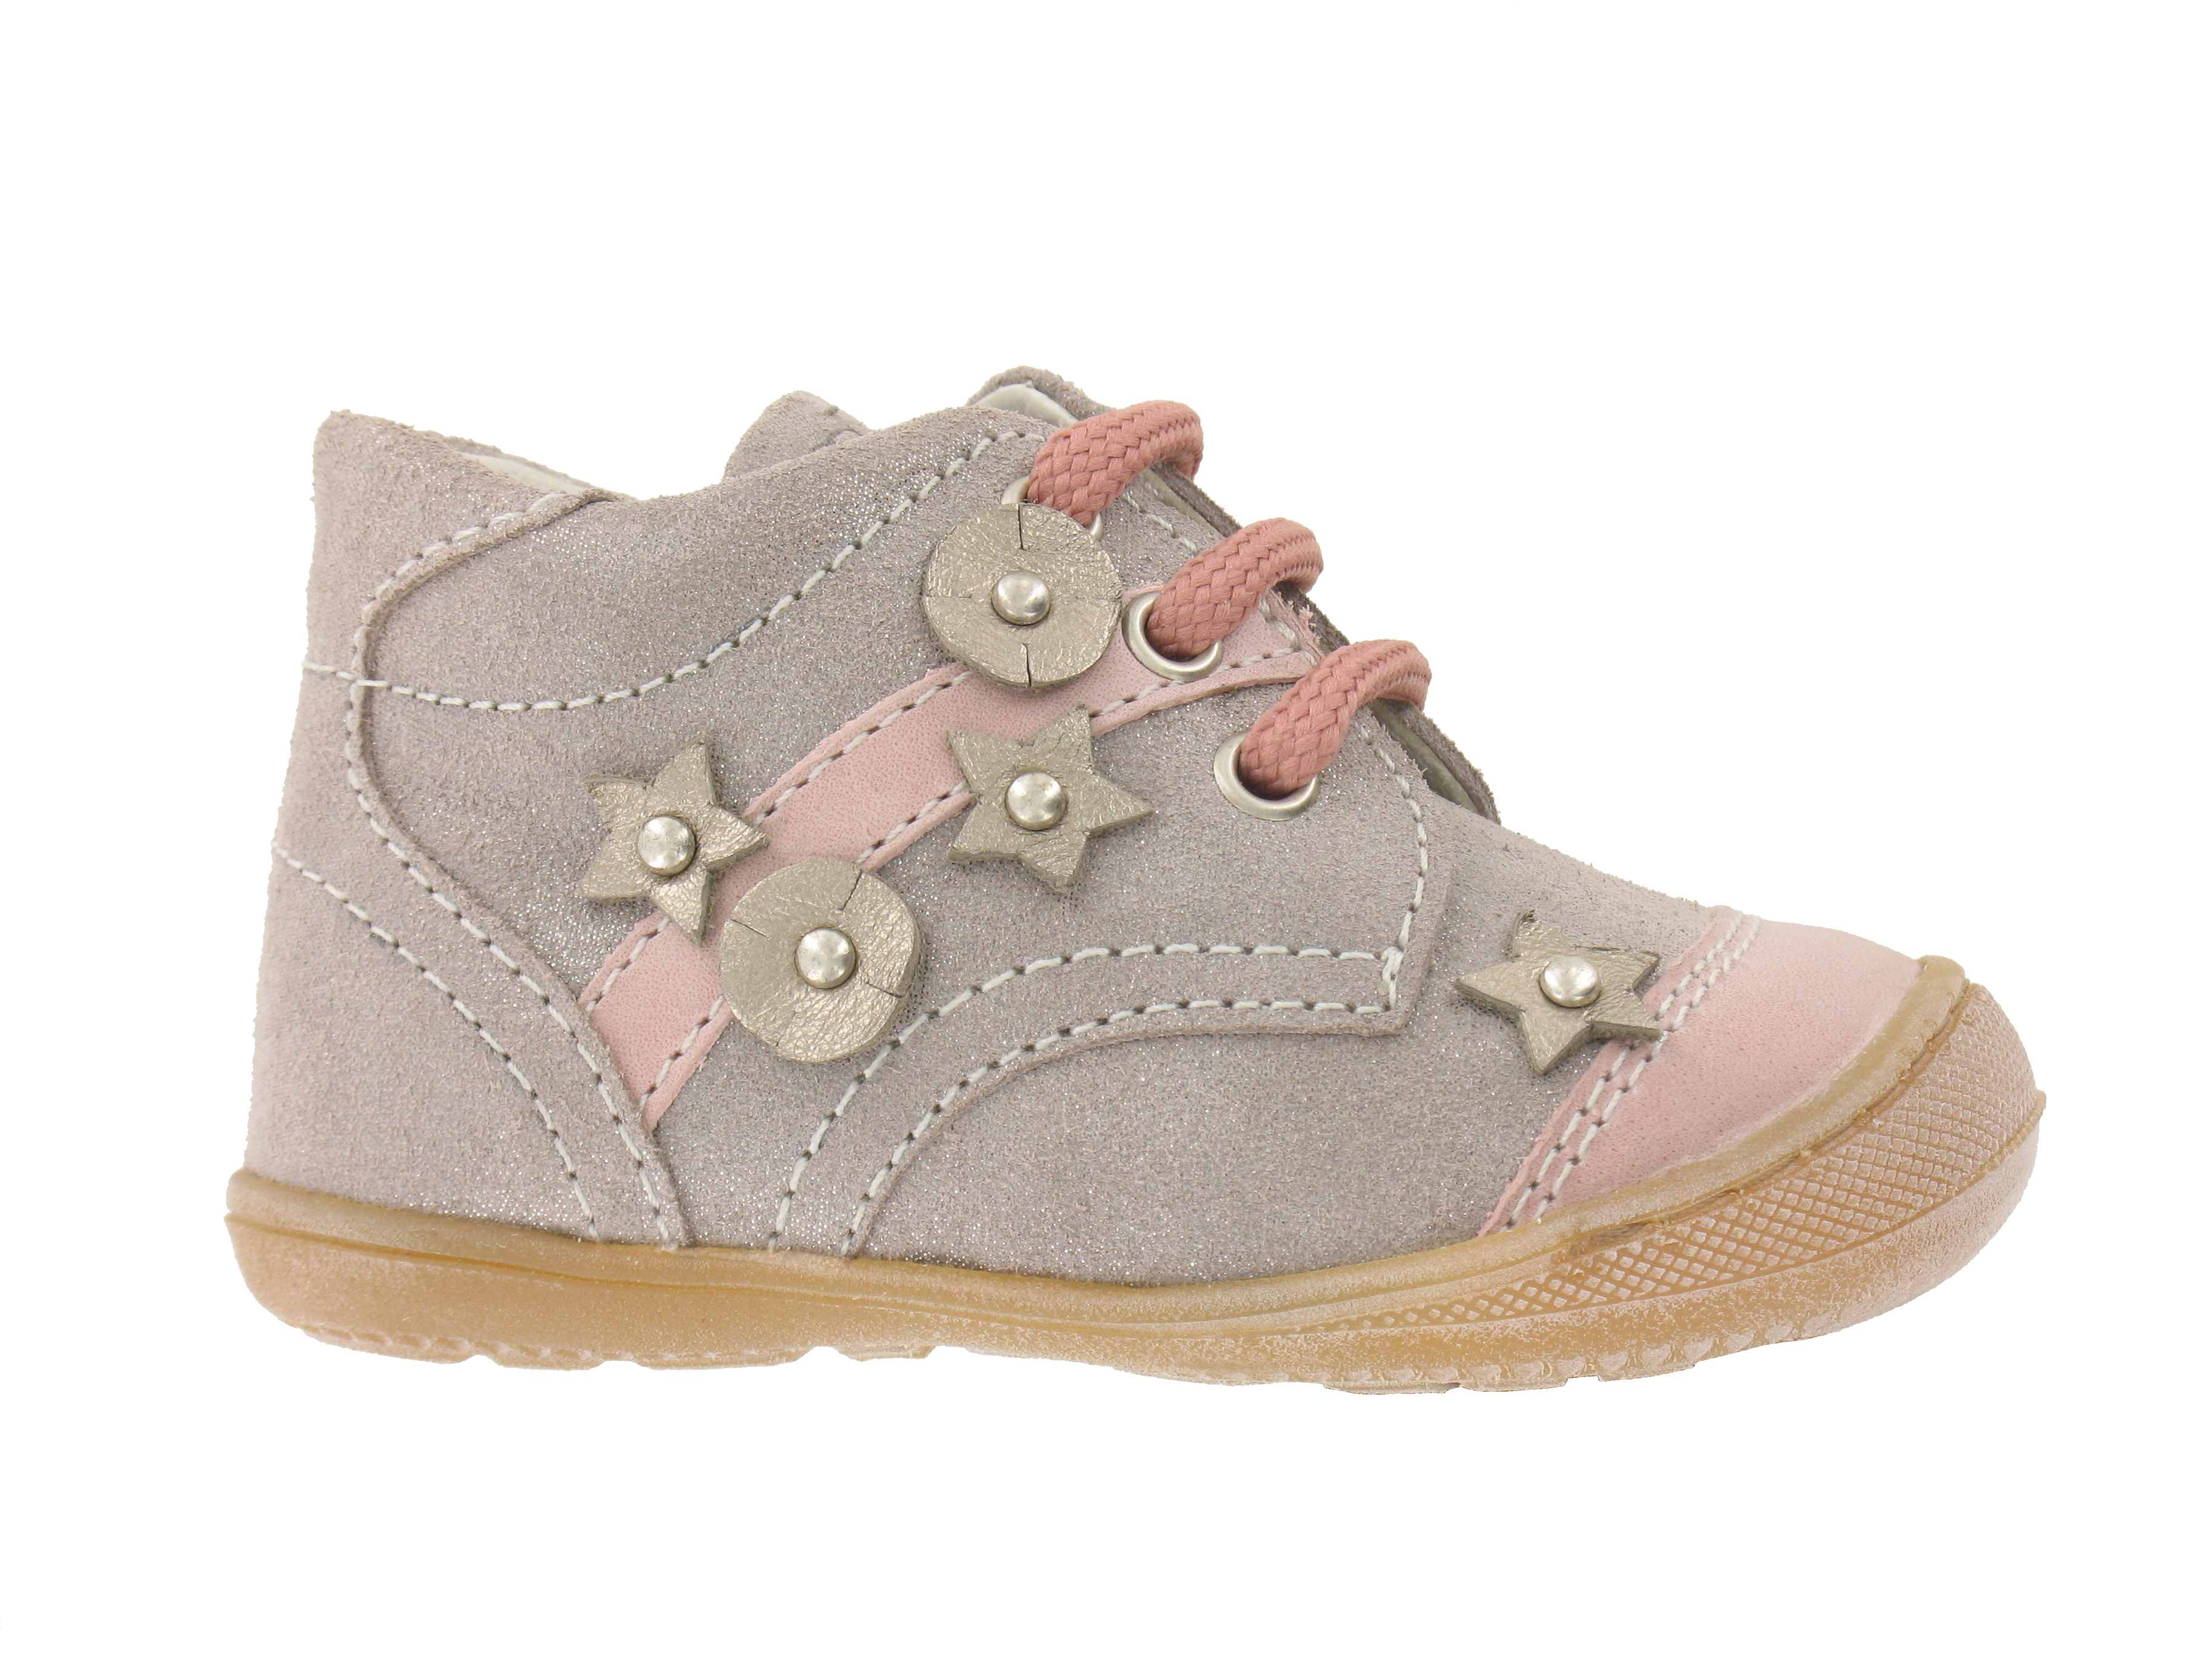 Primigi Shoes Review | Parents News: Information For Families in the UK